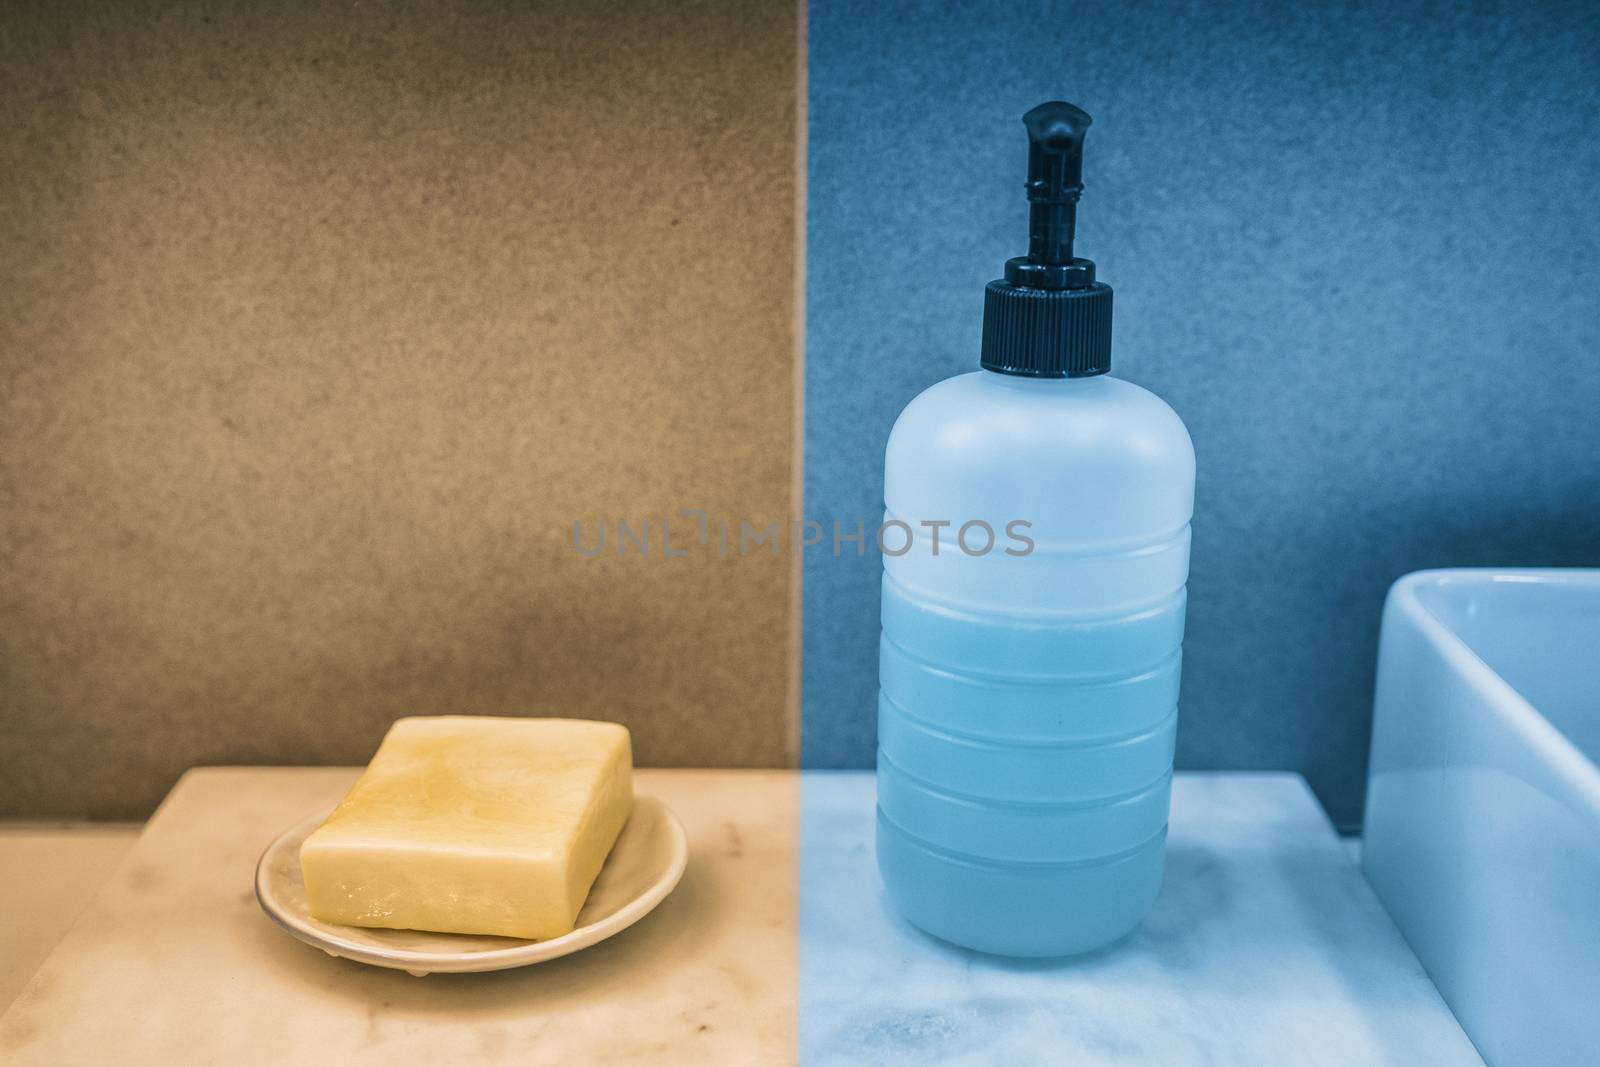 Soap bar versus liquid hand soap bottle comparison of hand washing products on home bathroom vanity. Yellow and blue color boxes to compare.